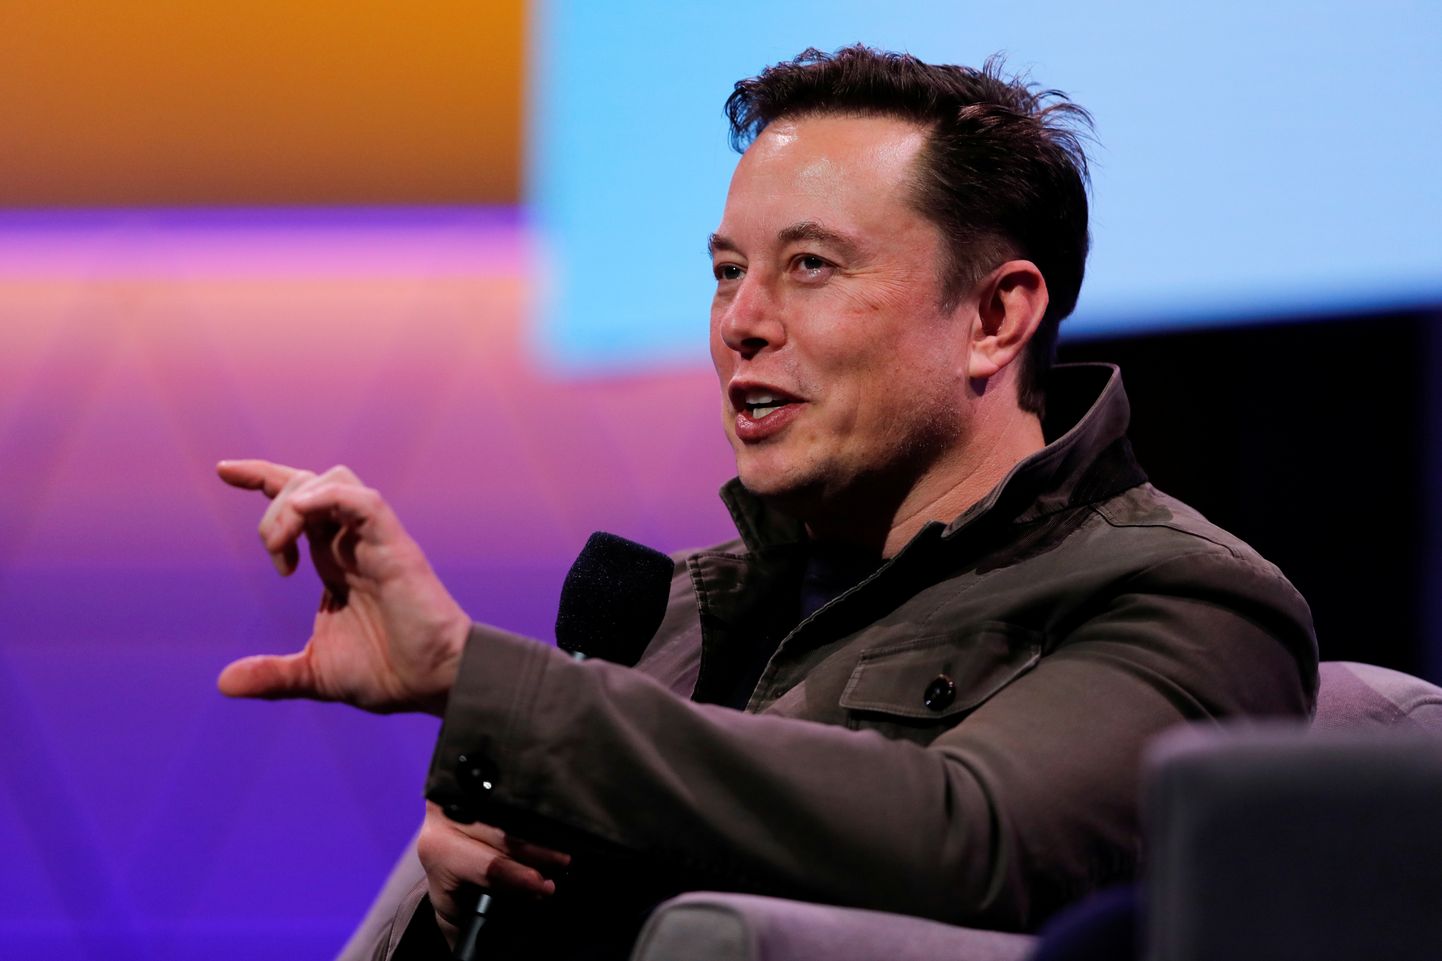 FILE PHOTO: SpaceX owner and Tesla CEO Elon Musk gestures during a conversation with legendary game designer Todd Howard (not pictured) at the E3 gaming convention in Los Angeles, California, U.S., June 13, 2019.  REUTERS/Mike Blake/File Photo